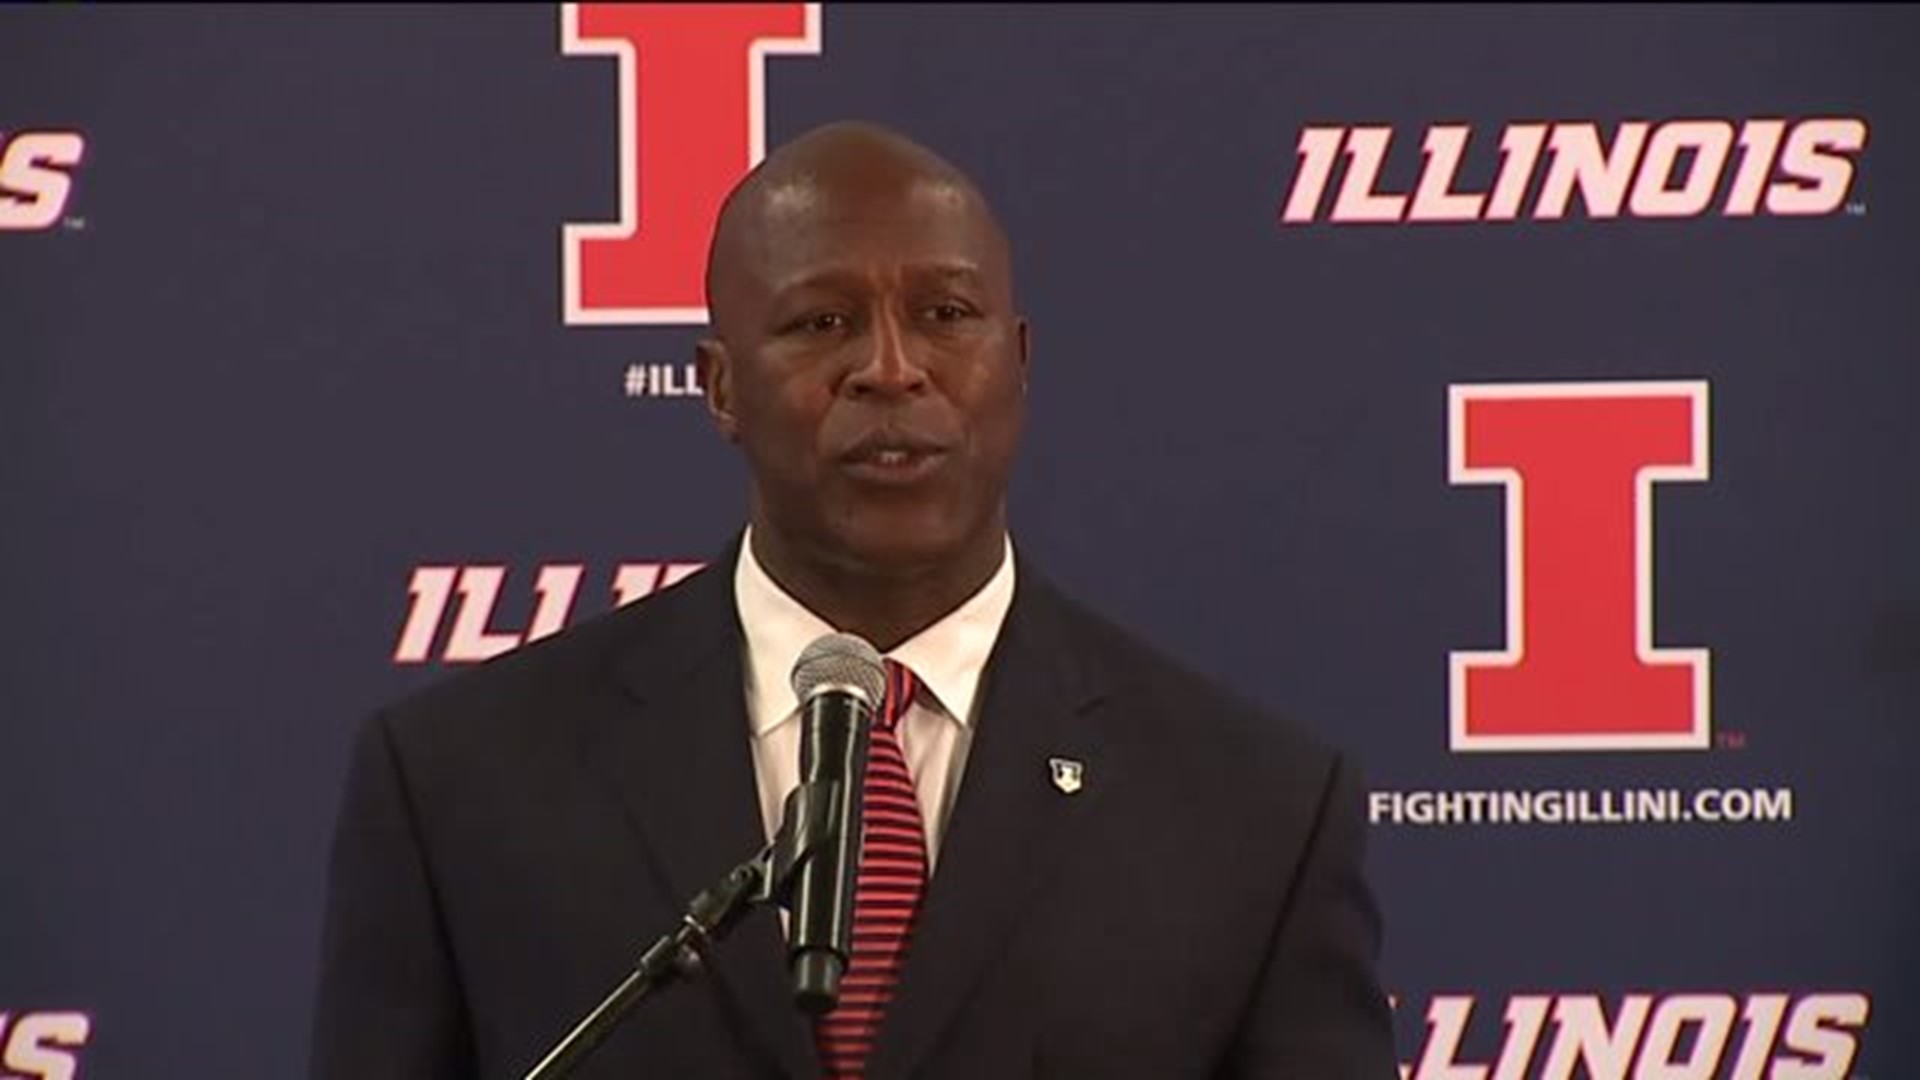 Lovie Smith answers questions at news conference 3-6-16